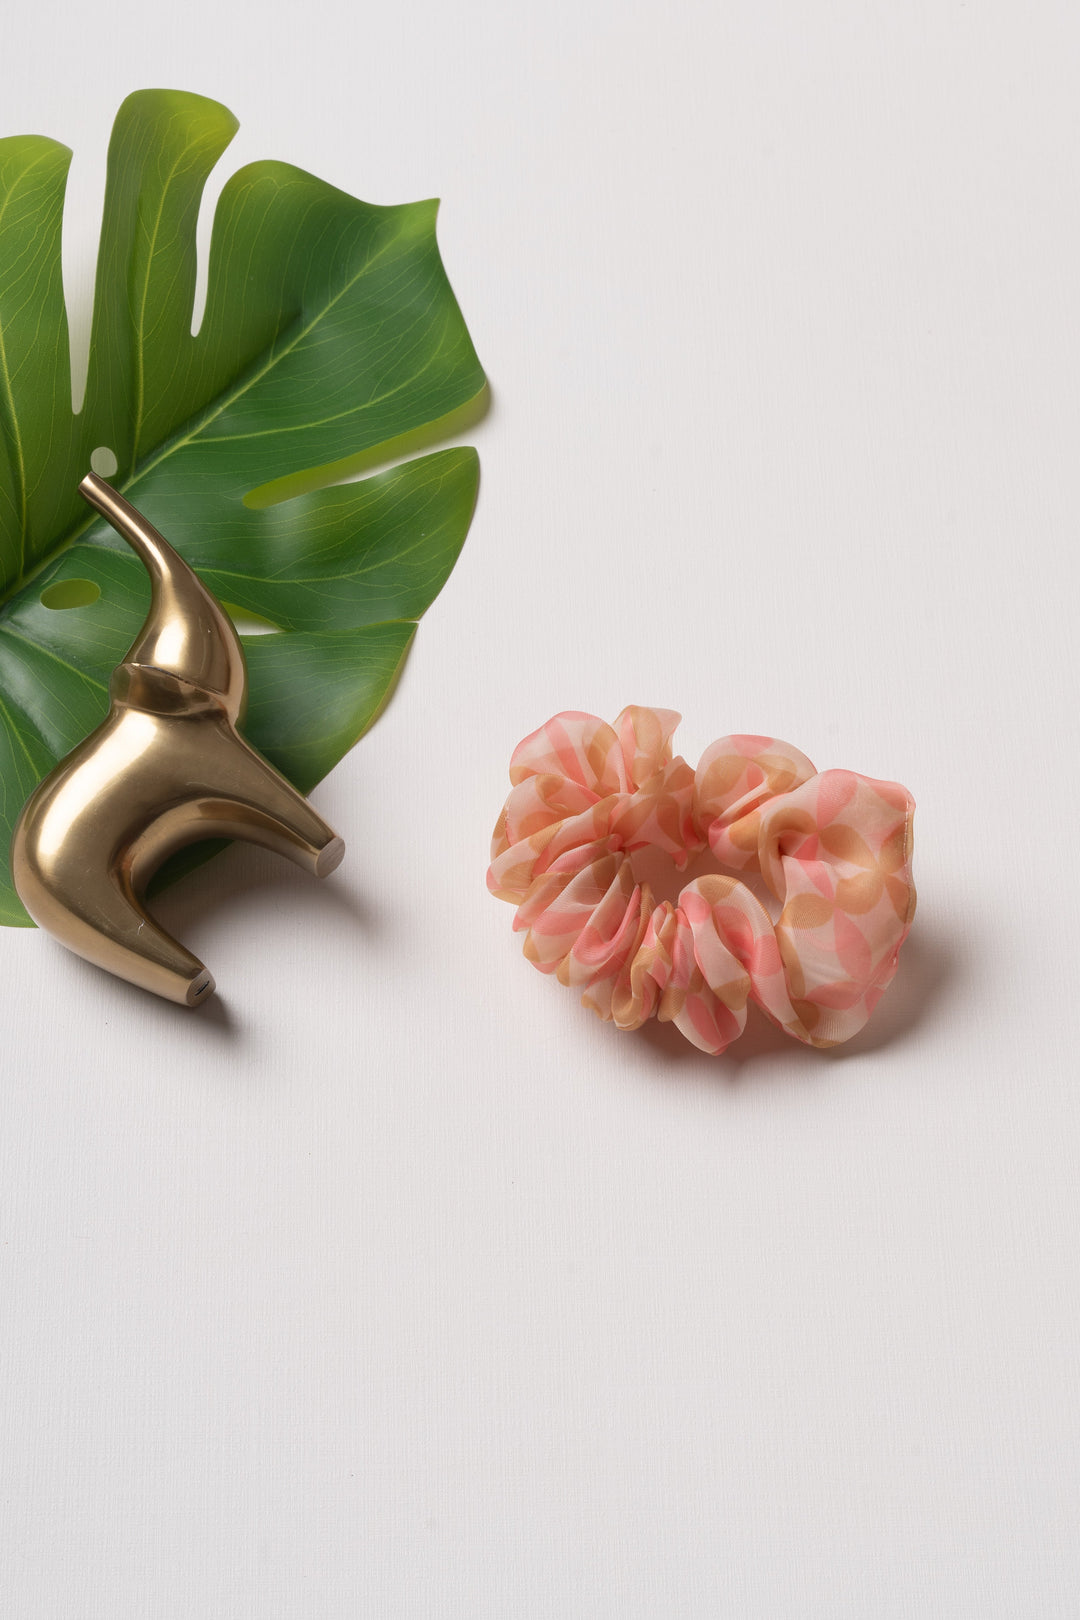 The Nesavu Scrunchies / Rubber Band Coral Blush Scrunchie - A Whimsical Accent for Lively Locks Nesavu Pink JHS18C Charming Coral Blush Scrunchie | Whimsical Hair Accessory for Trendy Updos | The Nesavu